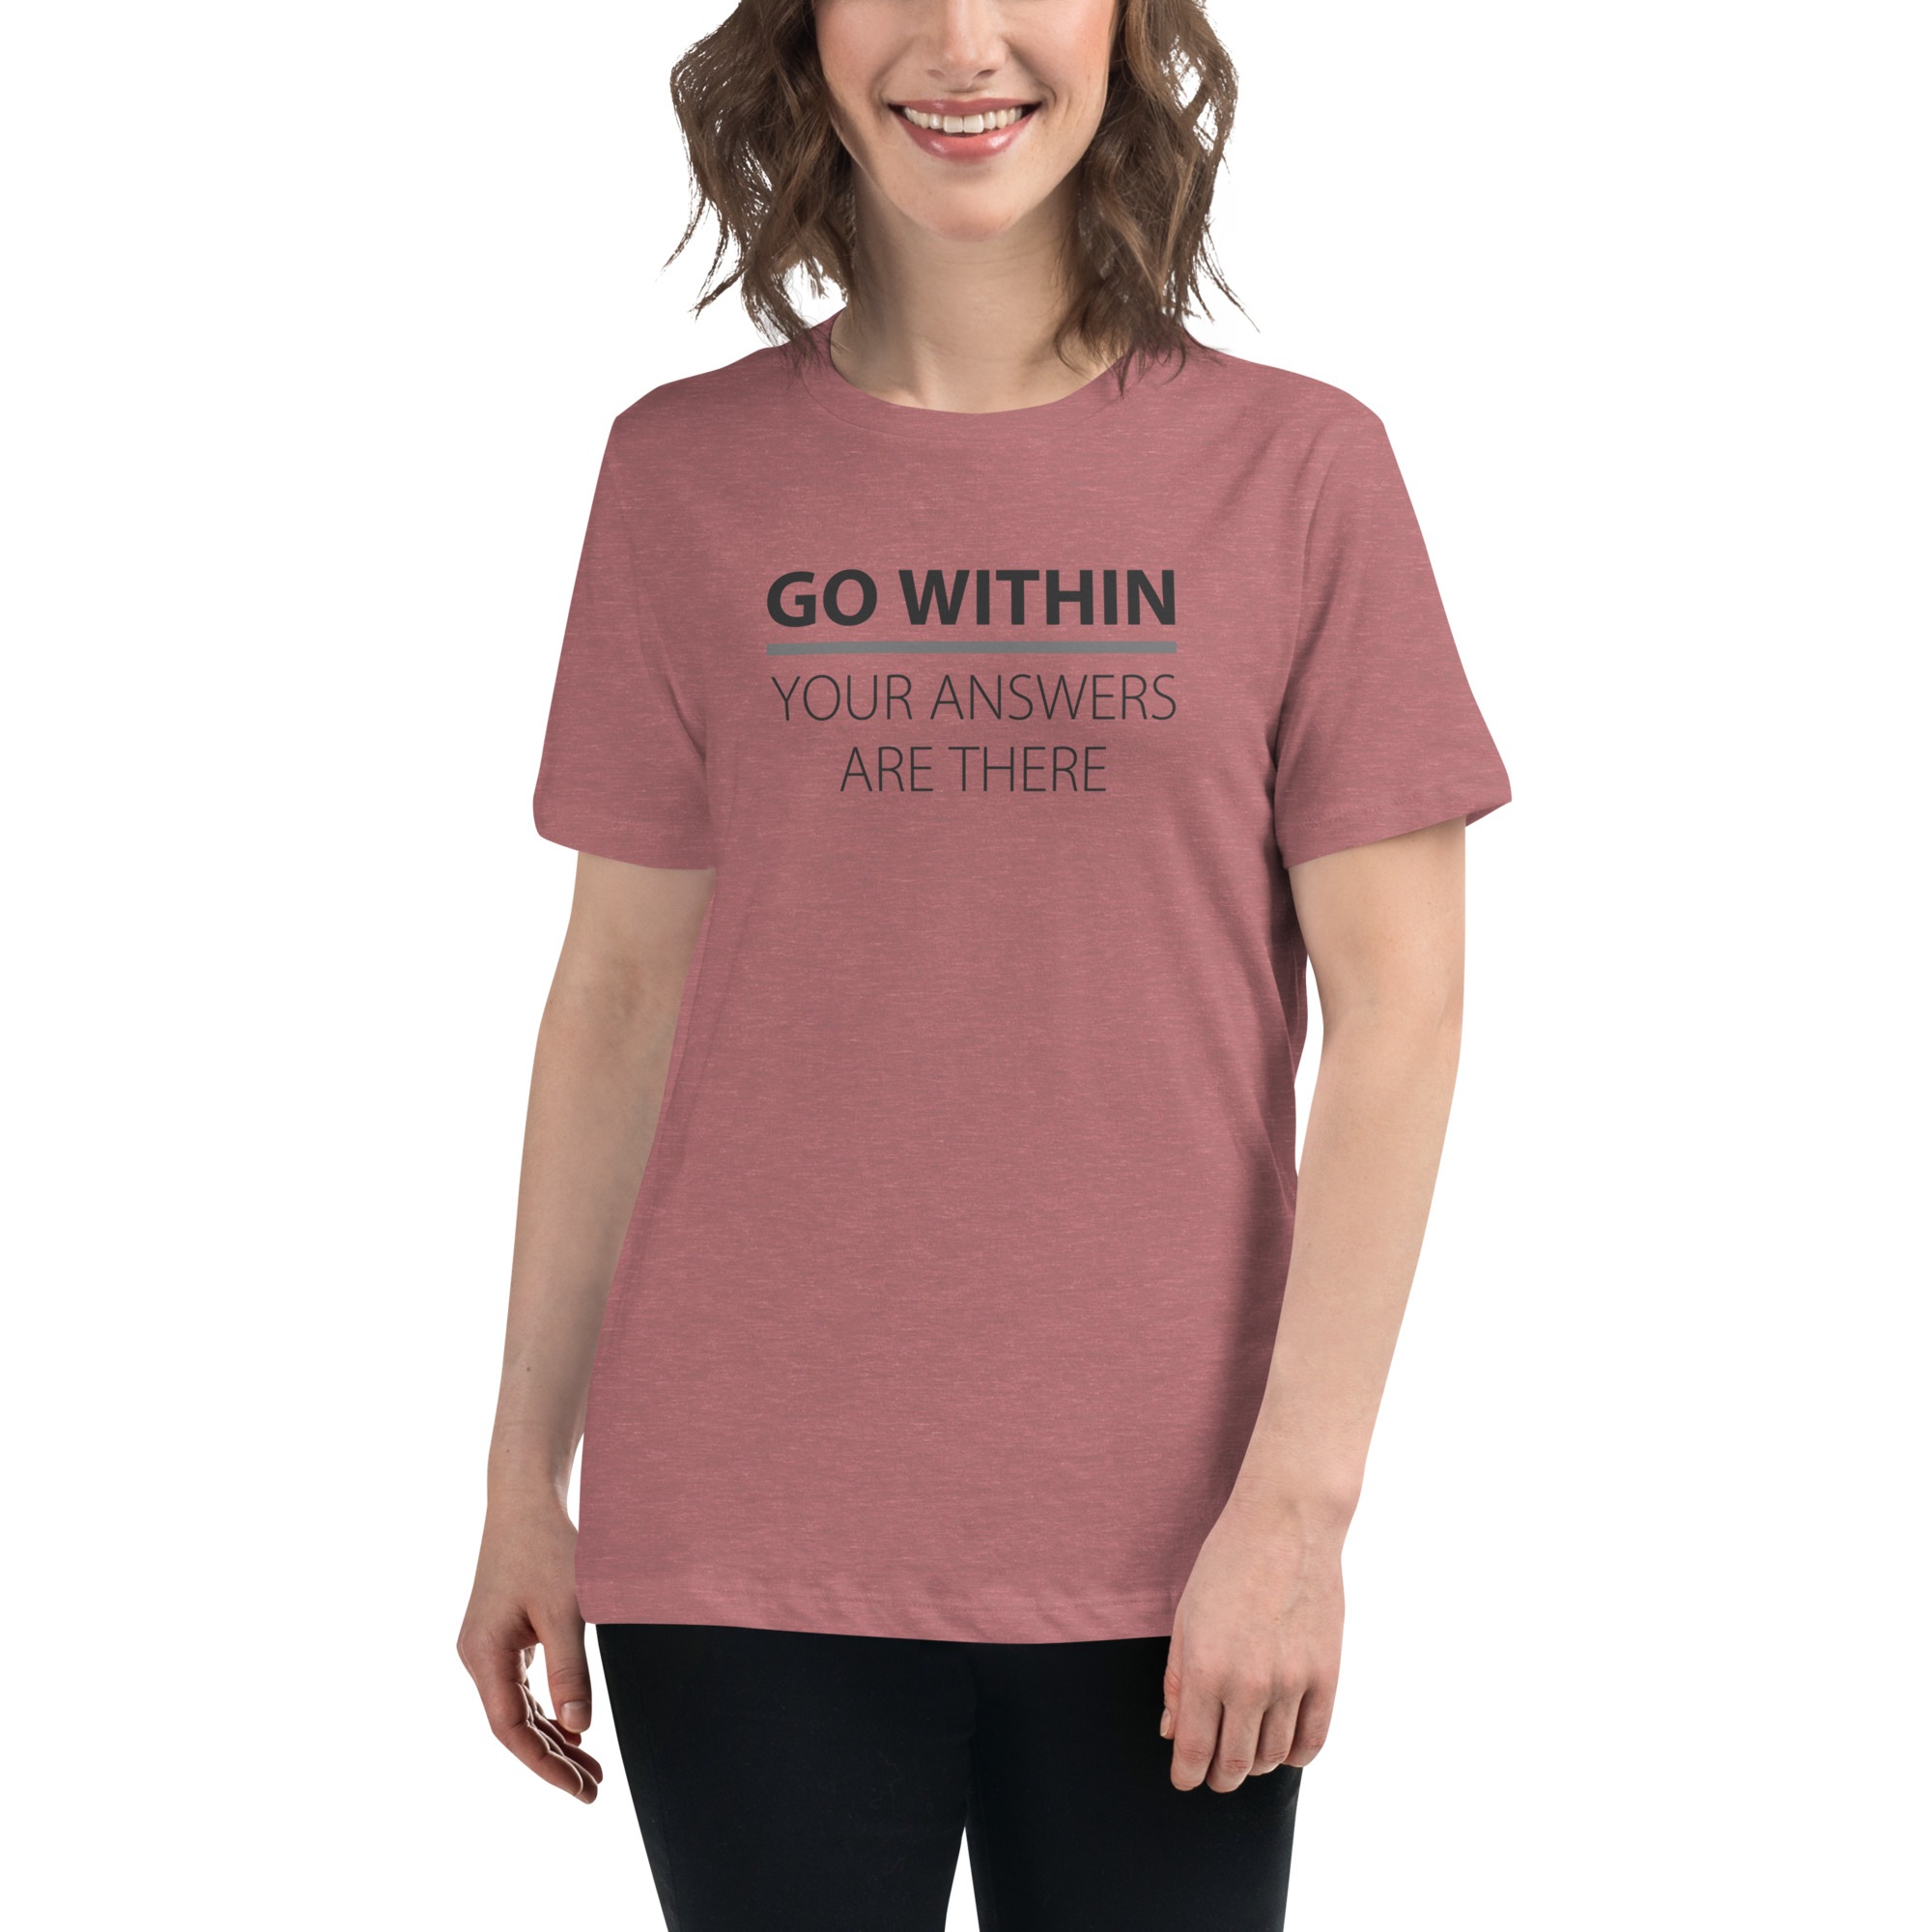 Go Within Your Answers Are There T-shirt